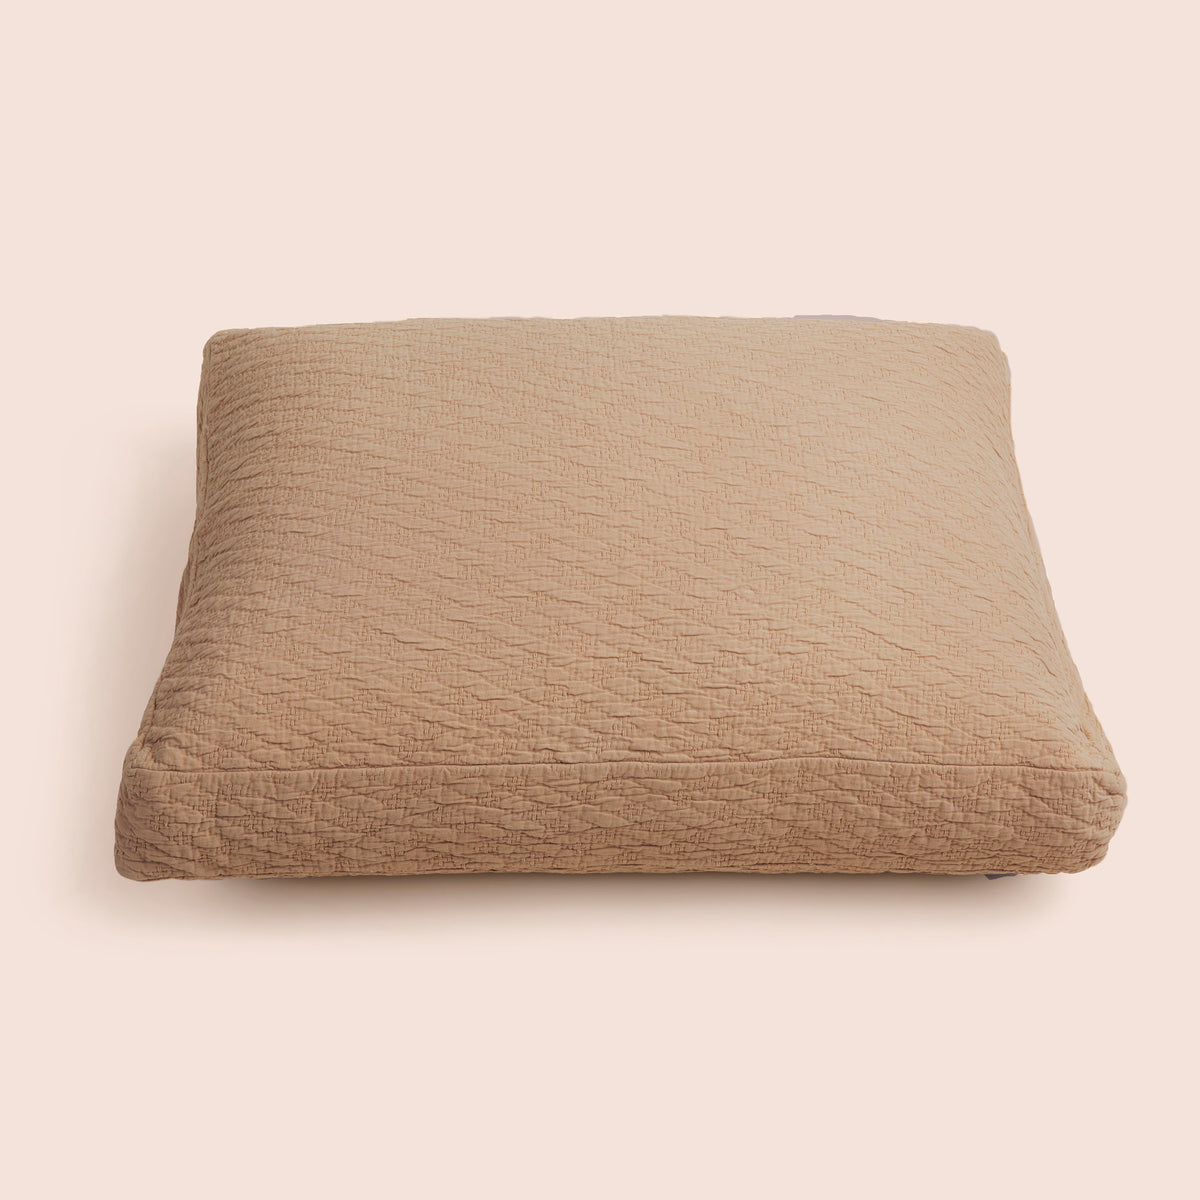 Image of the Ochre Wave Meditation Cushion Cover on a meditation cushion with a light pink background